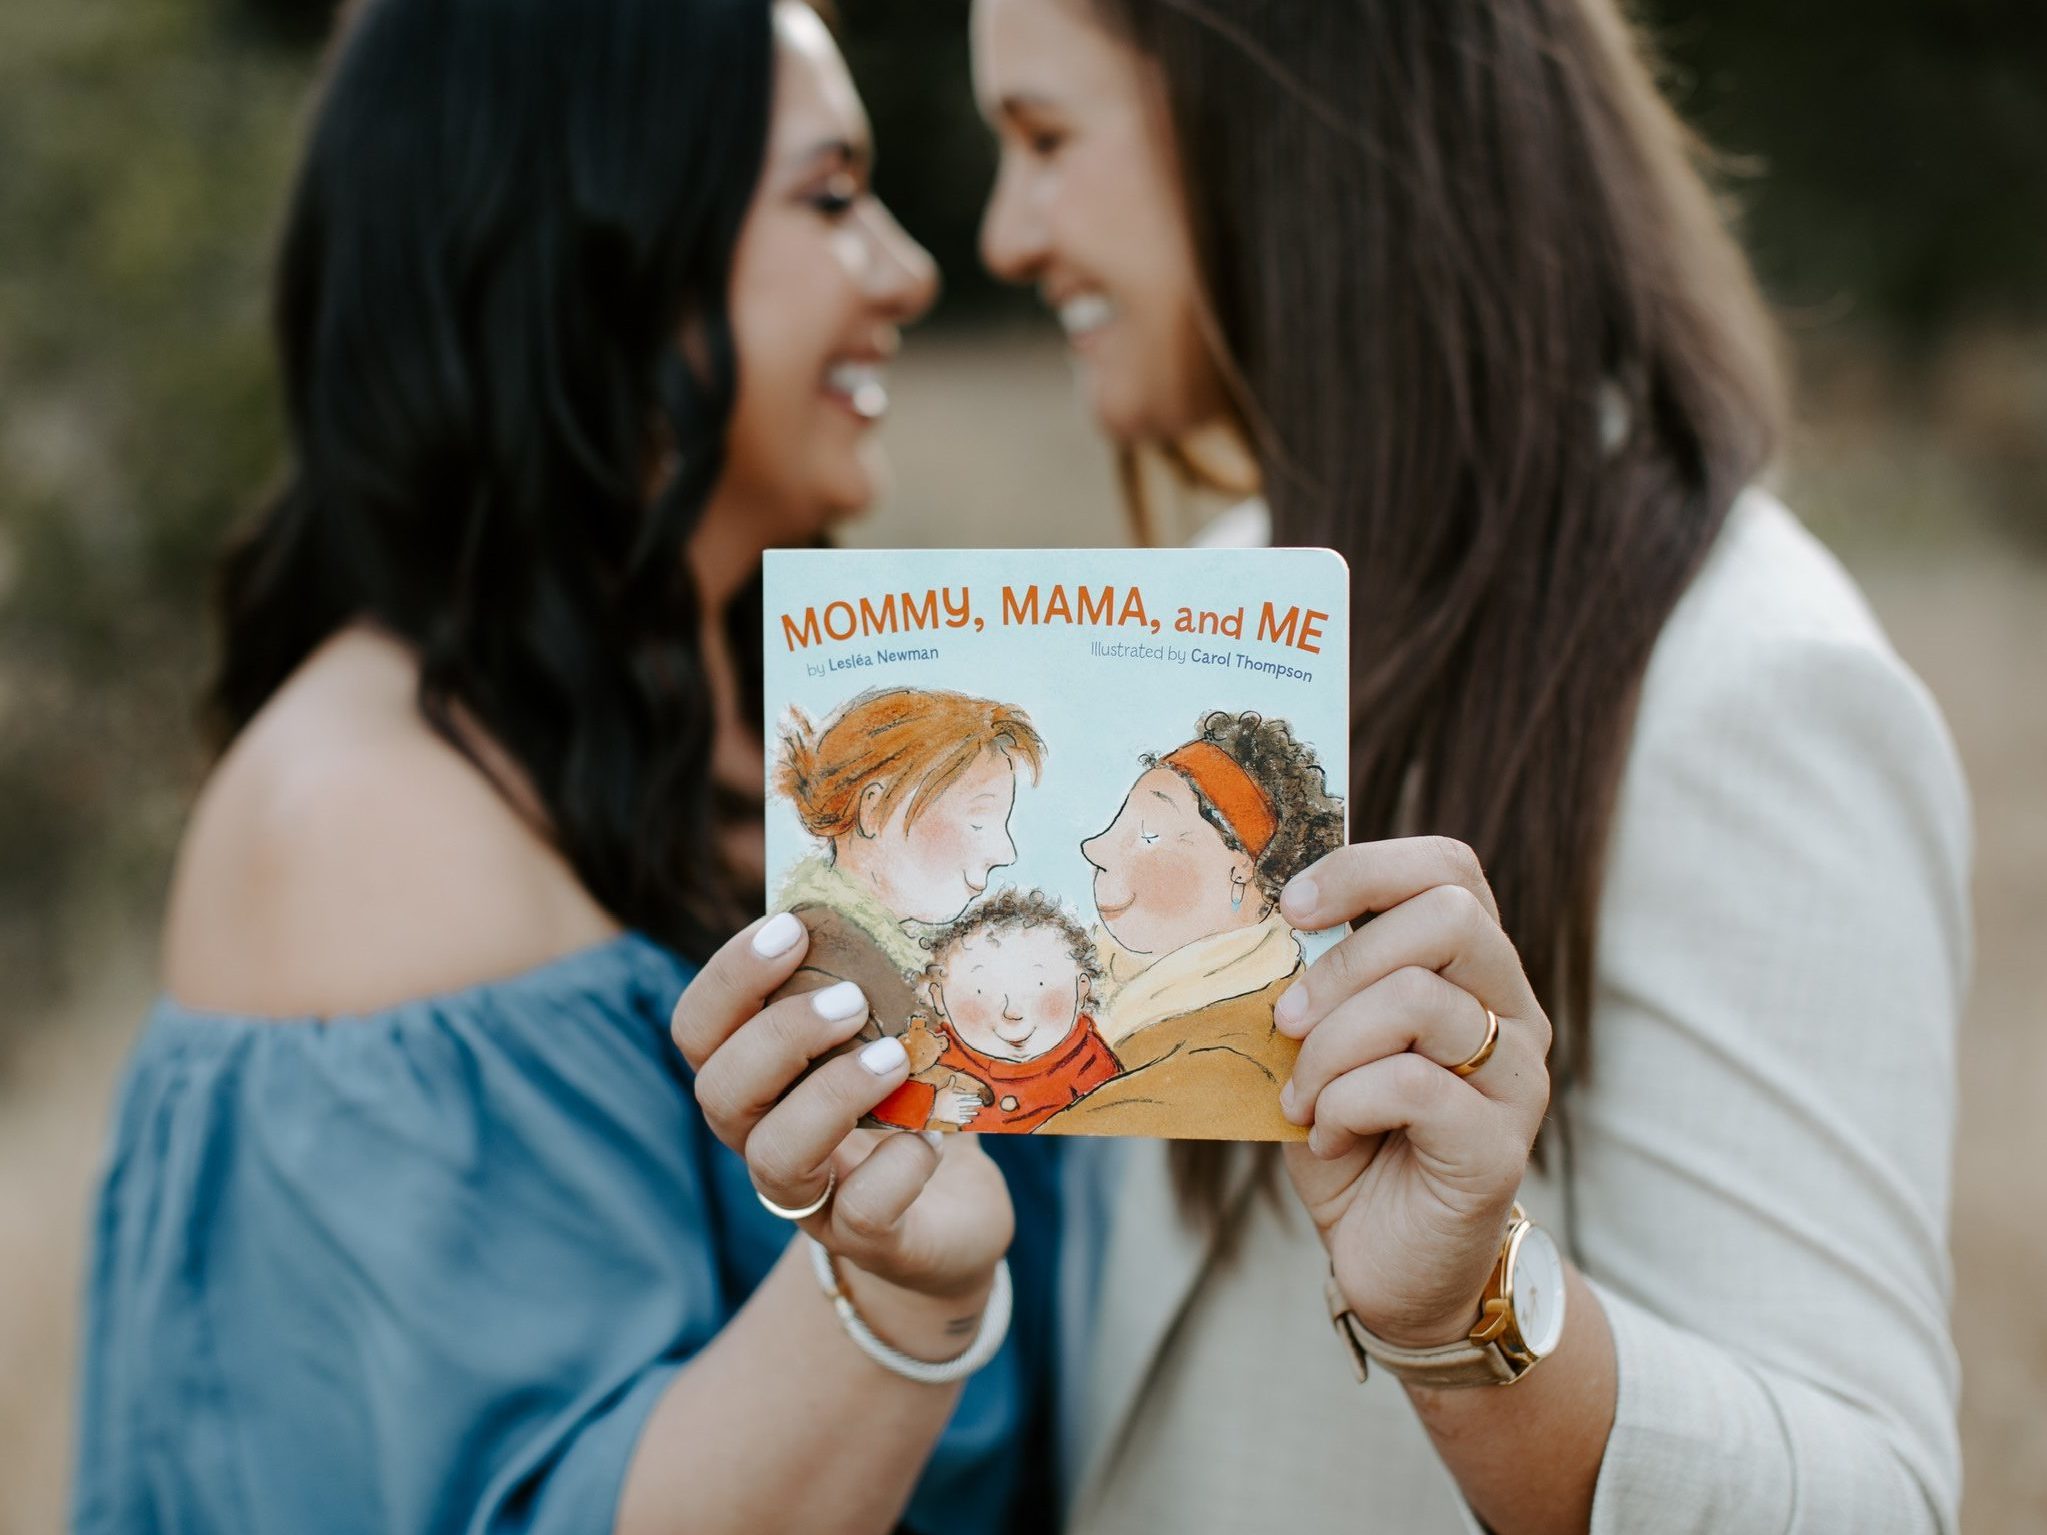 Jaime and her wife, Jessica, holding up a book that reads "Mommy, Mama, and Me." 